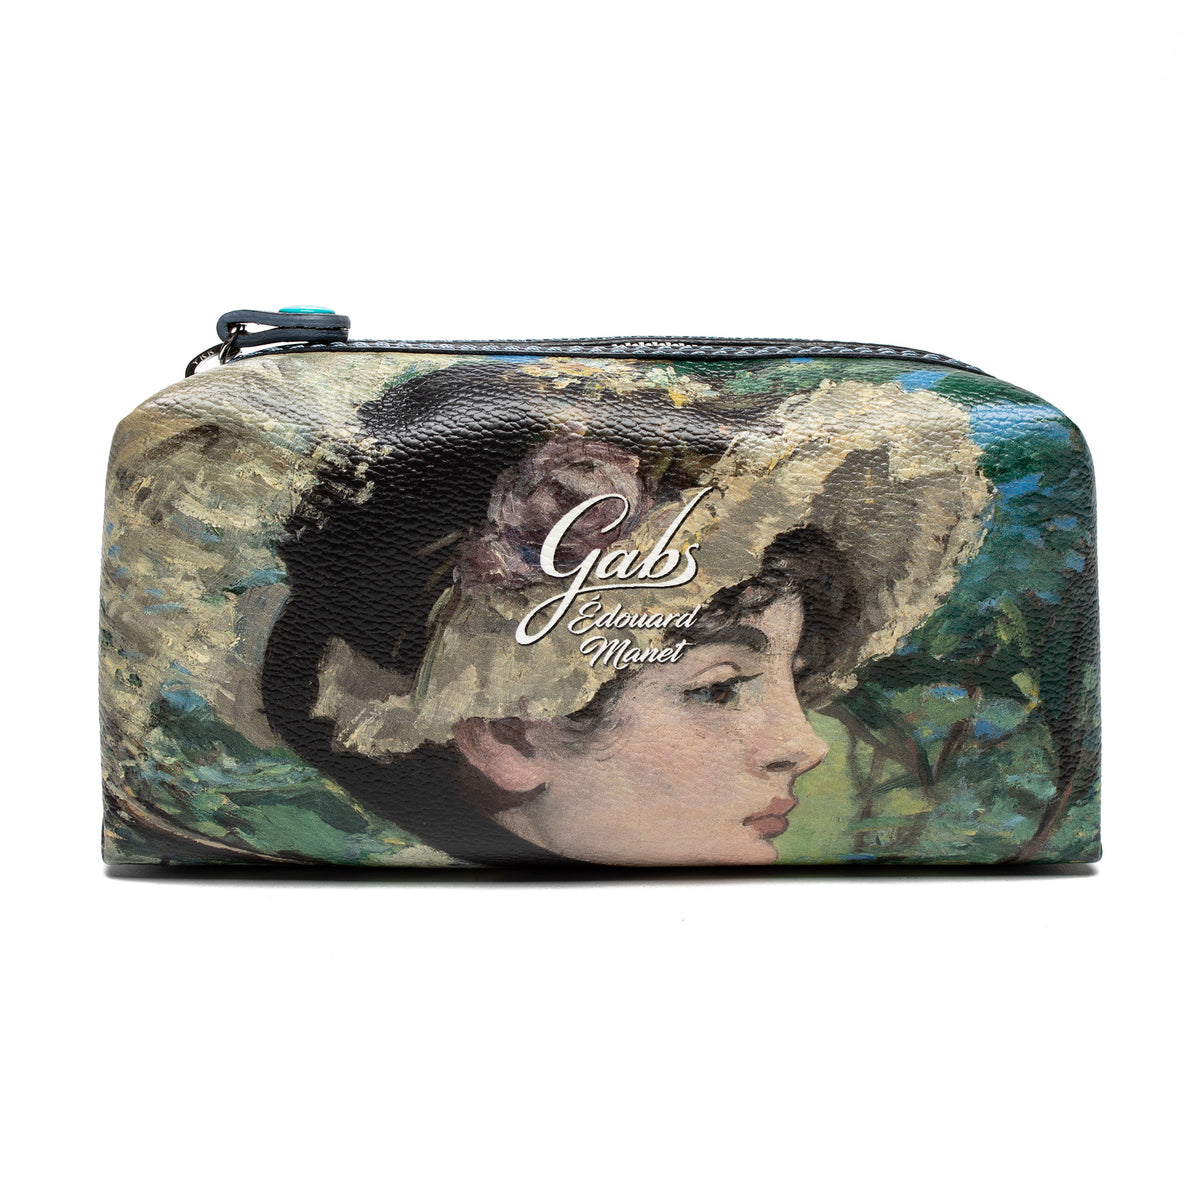 Cosmetics Bag featuring Manet&#39;s Jeanne Spring by Gabs, Italy